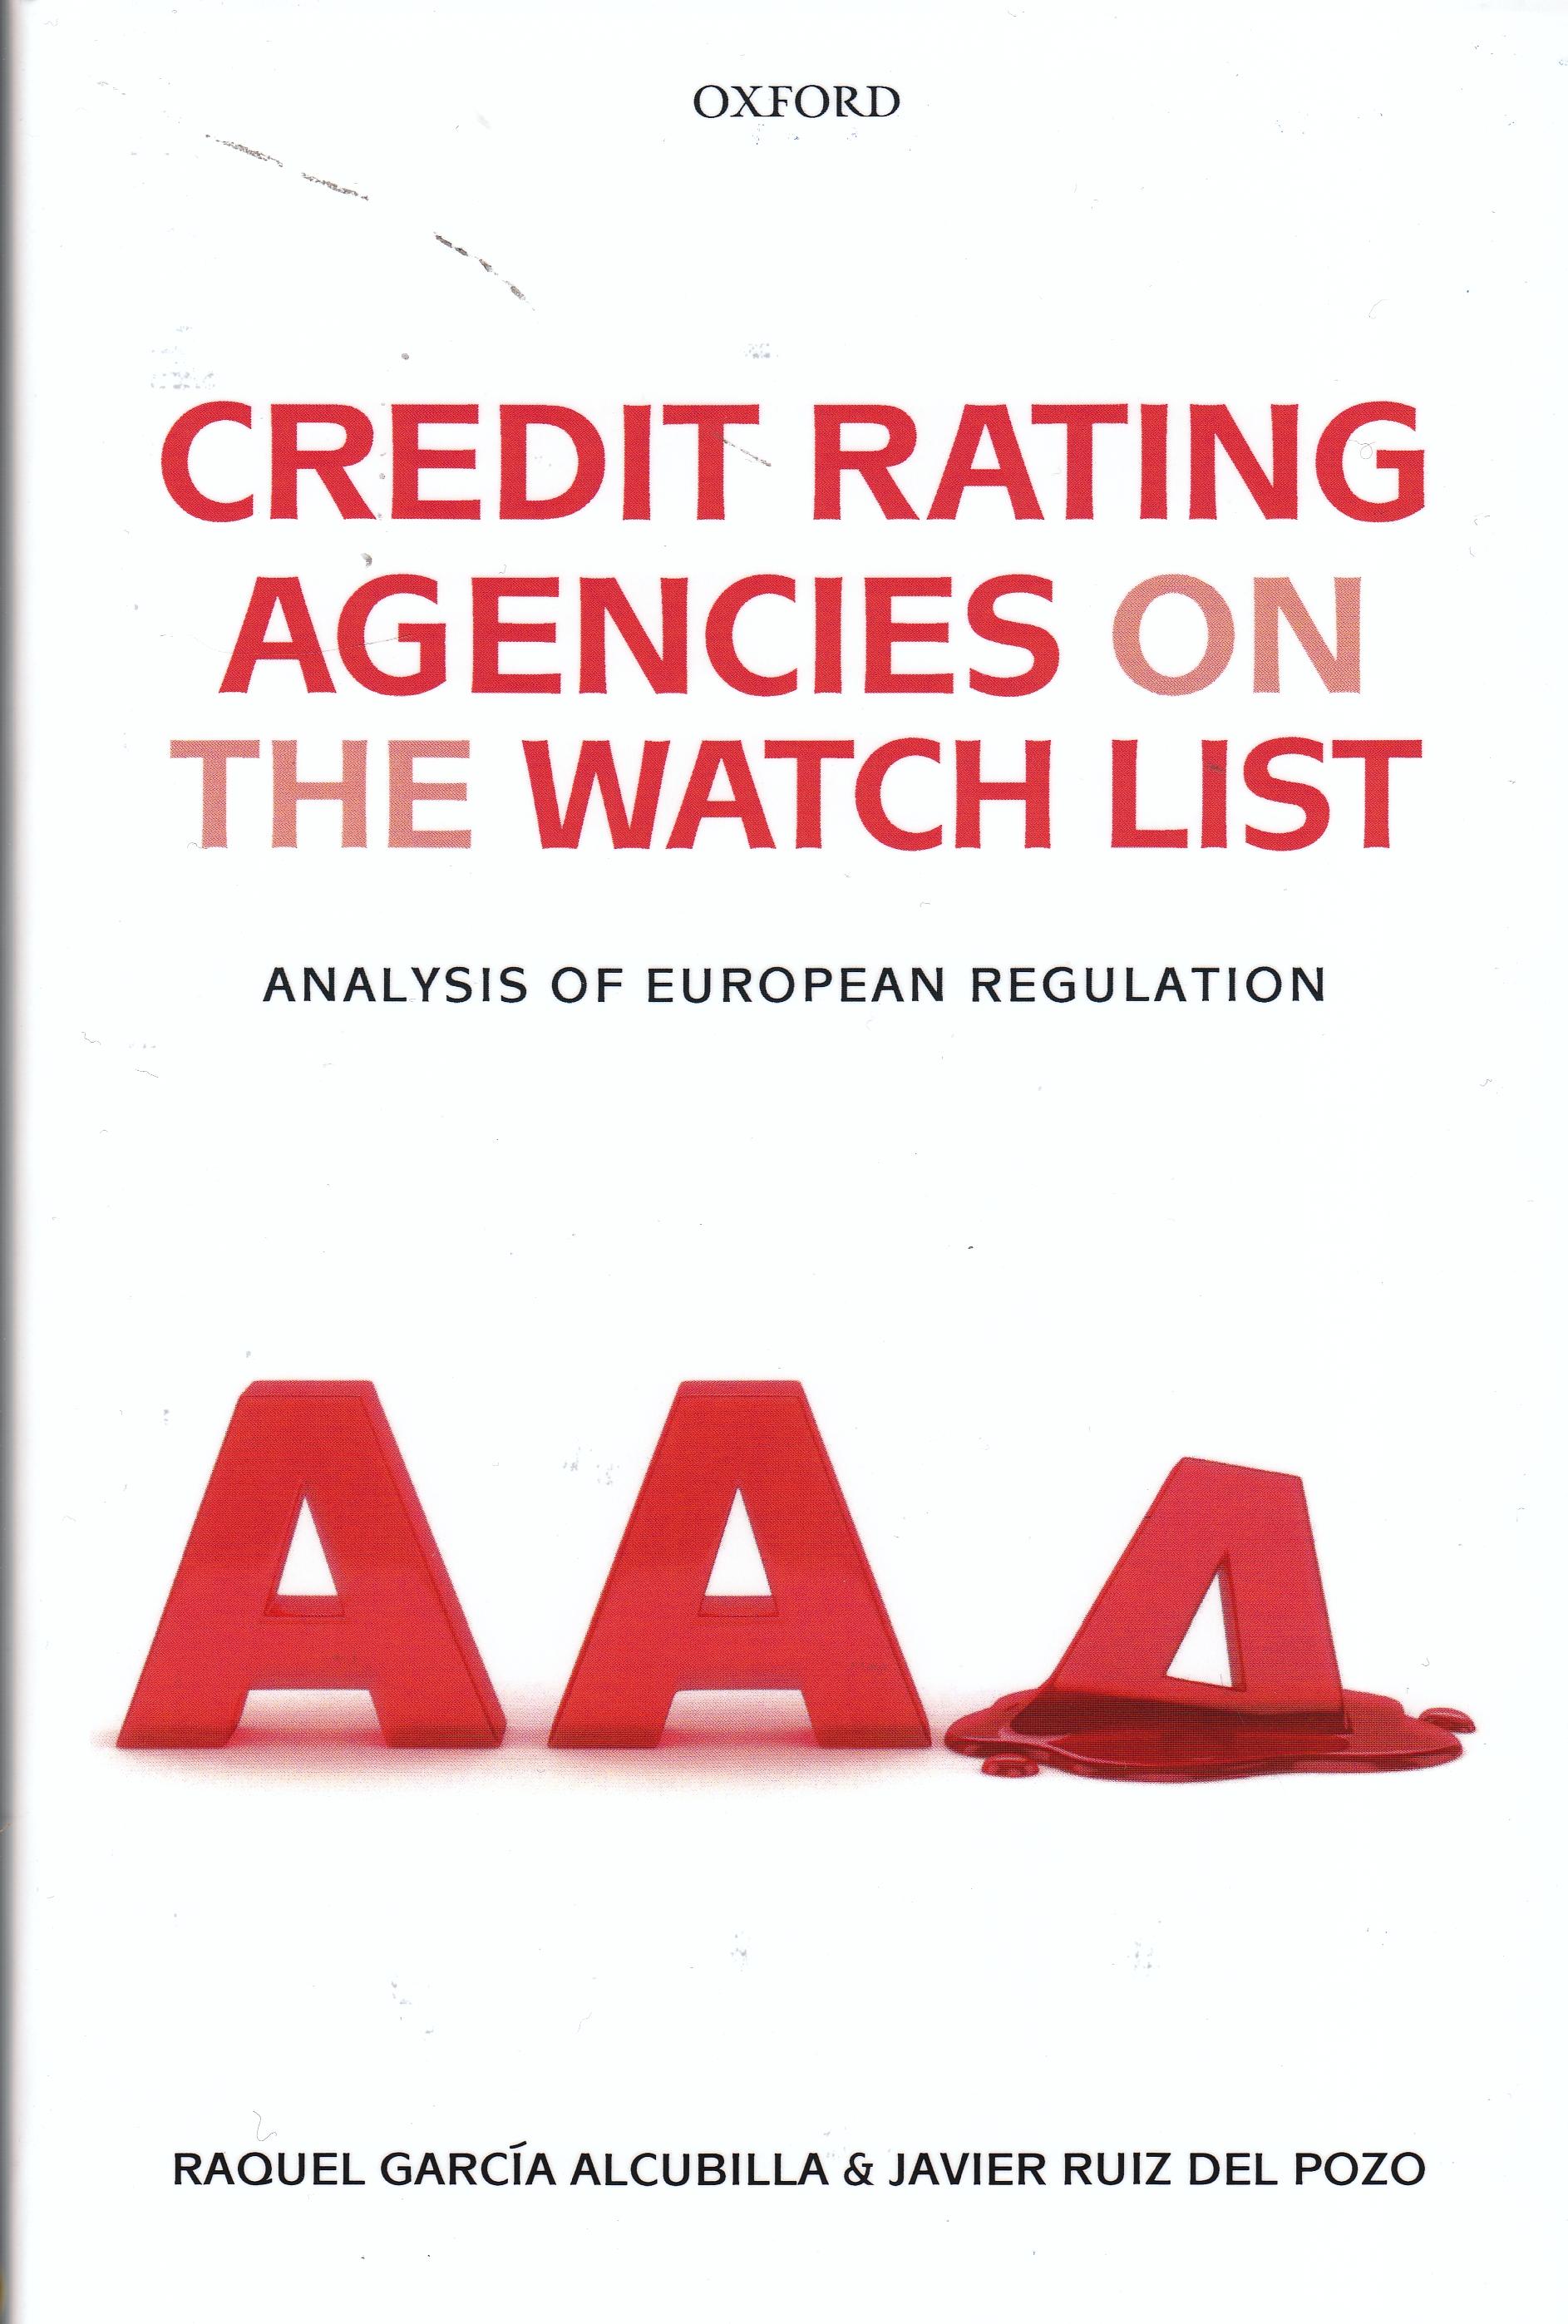 Credit Rating Agencies on the Watch List "Analysis of European Regulation"